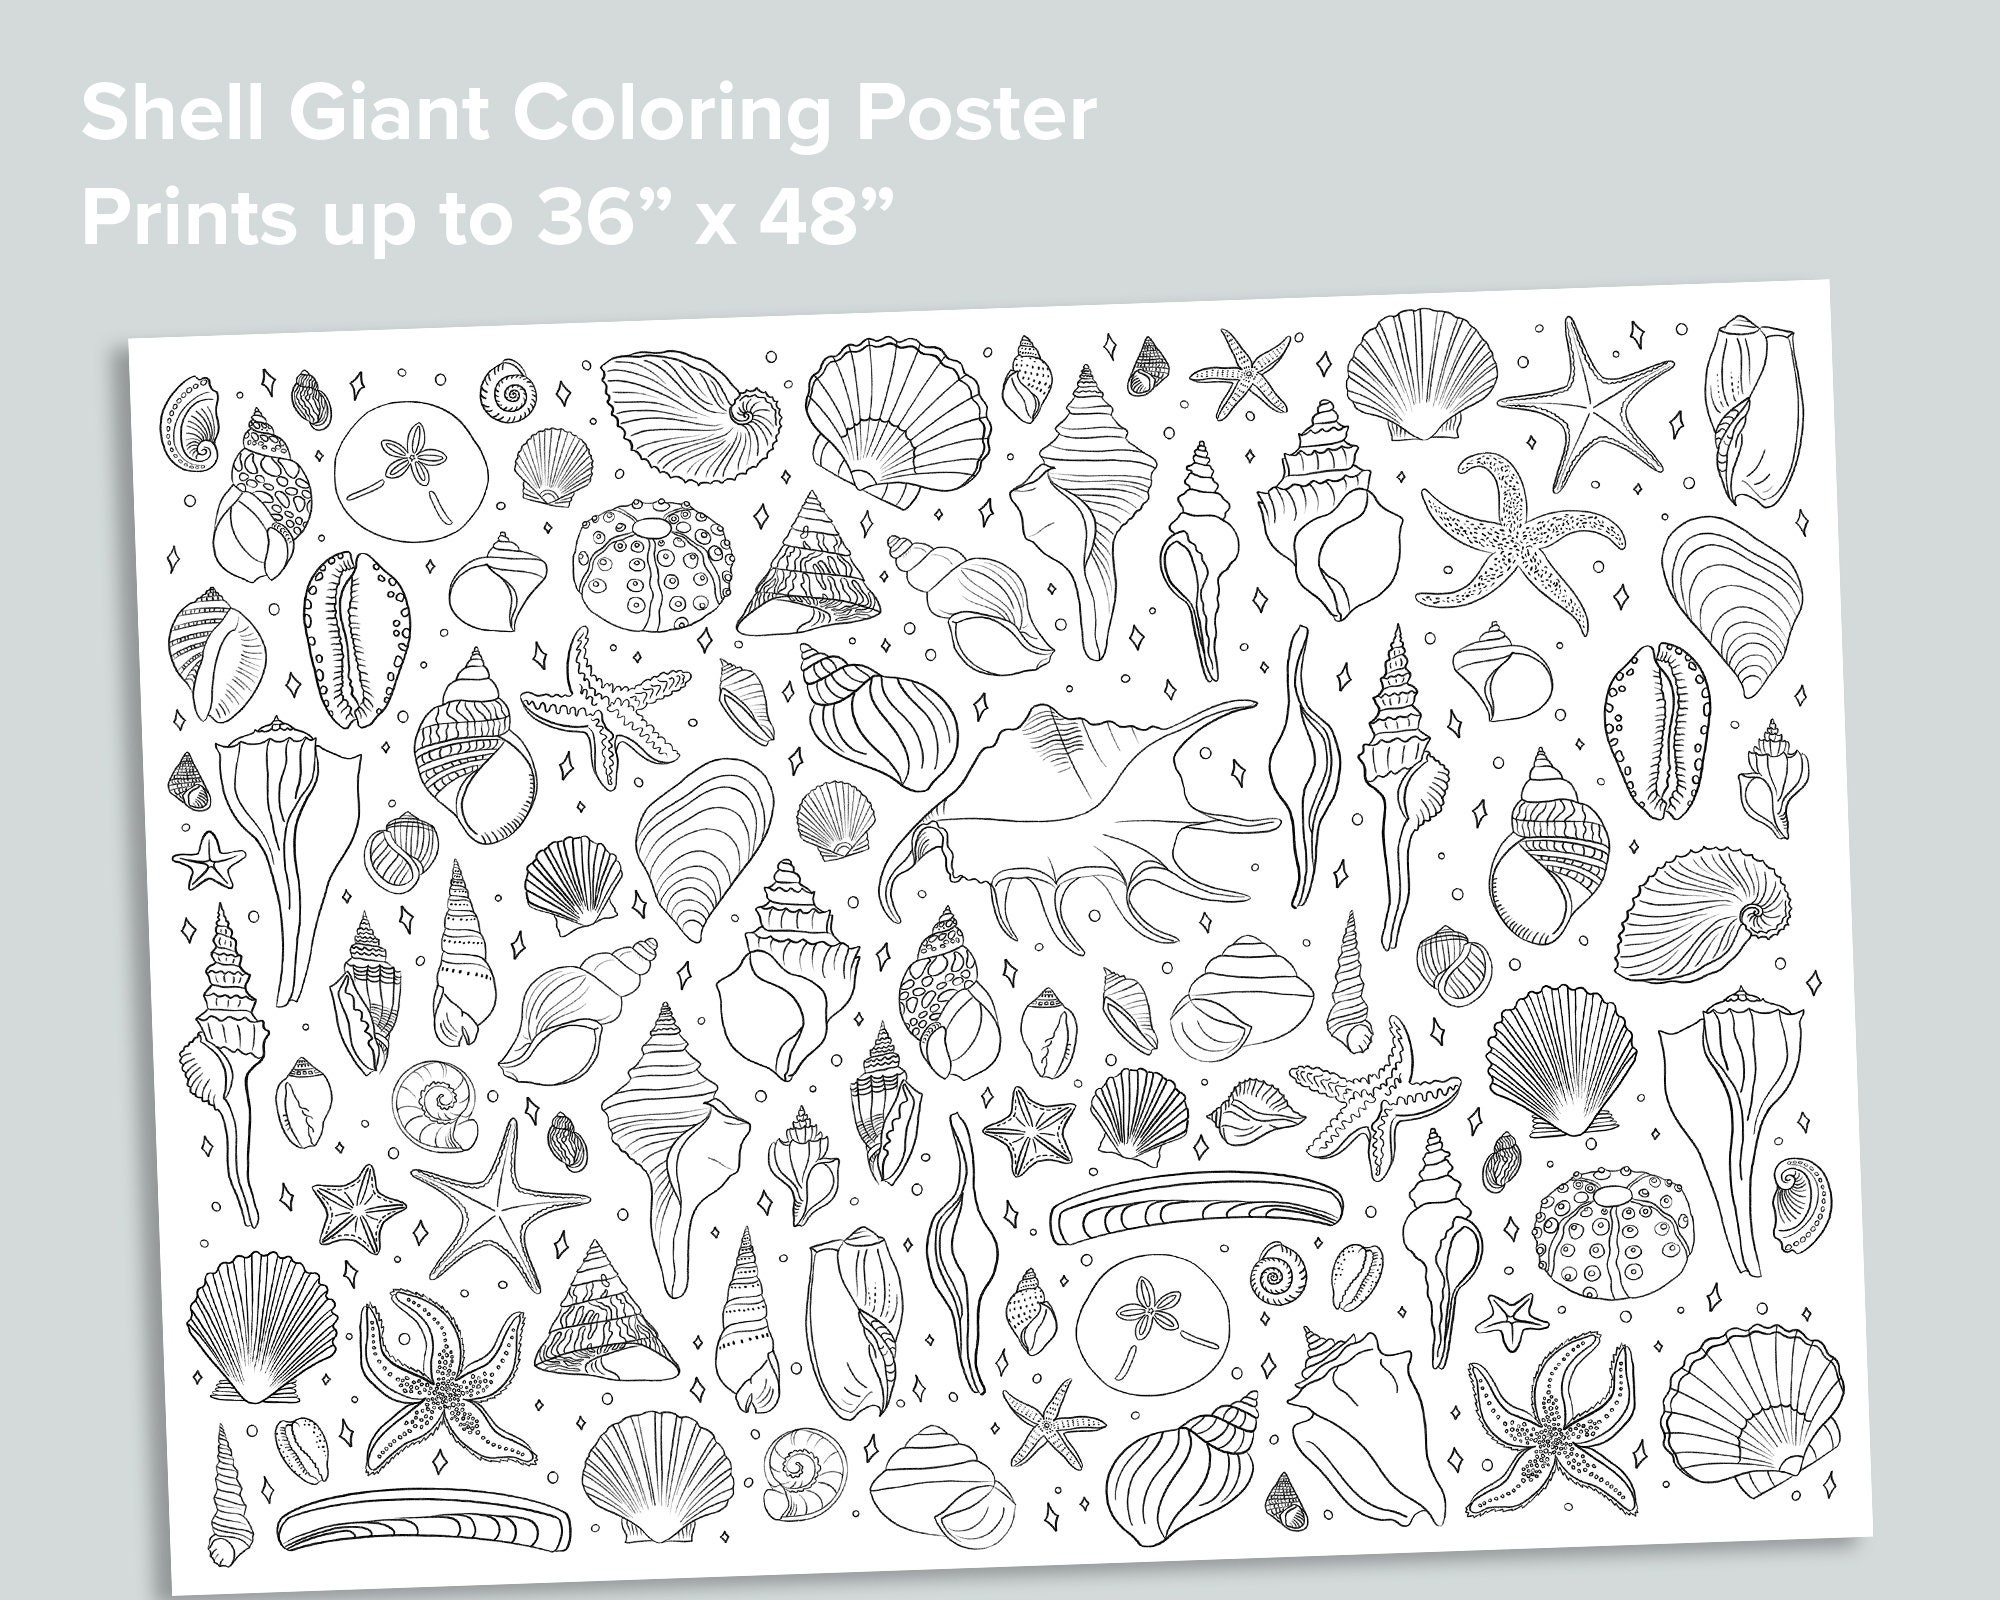 Seashell giant coloring poster homeschool printables black and white large coloring pages ocean preschool activity shells